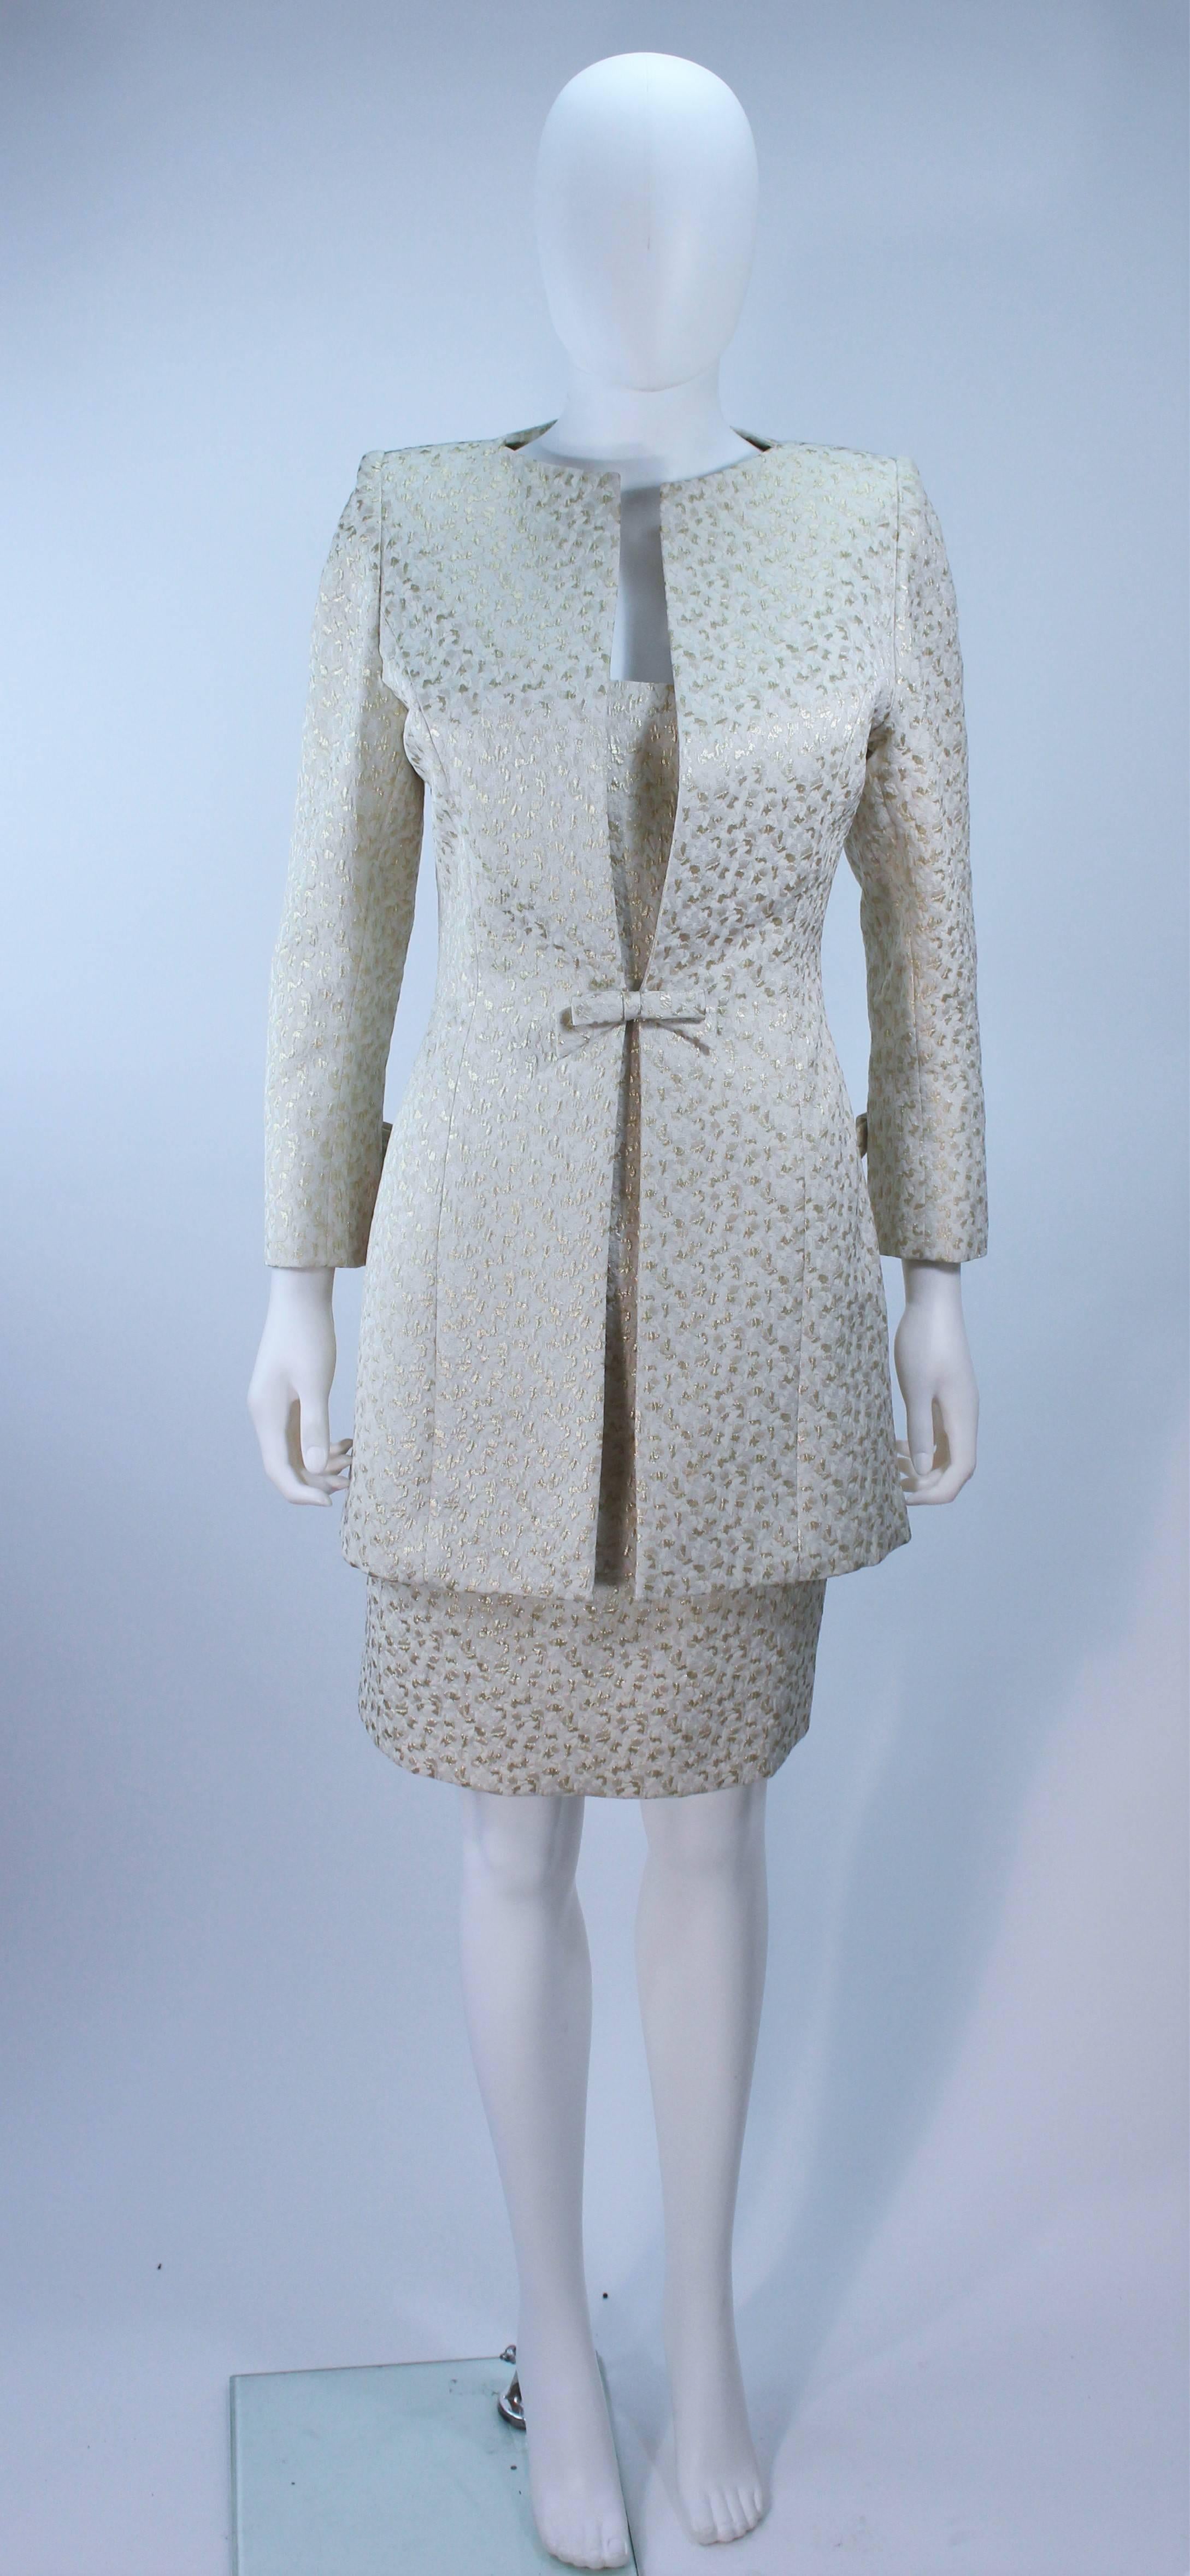 This Travilla  ensemble is composed of an off white and gold metallic brocade silk. The coat features bow accents at the center front and sleeves with a hook and eye closure. The dress features a classic silhouette with a zipper closure. In